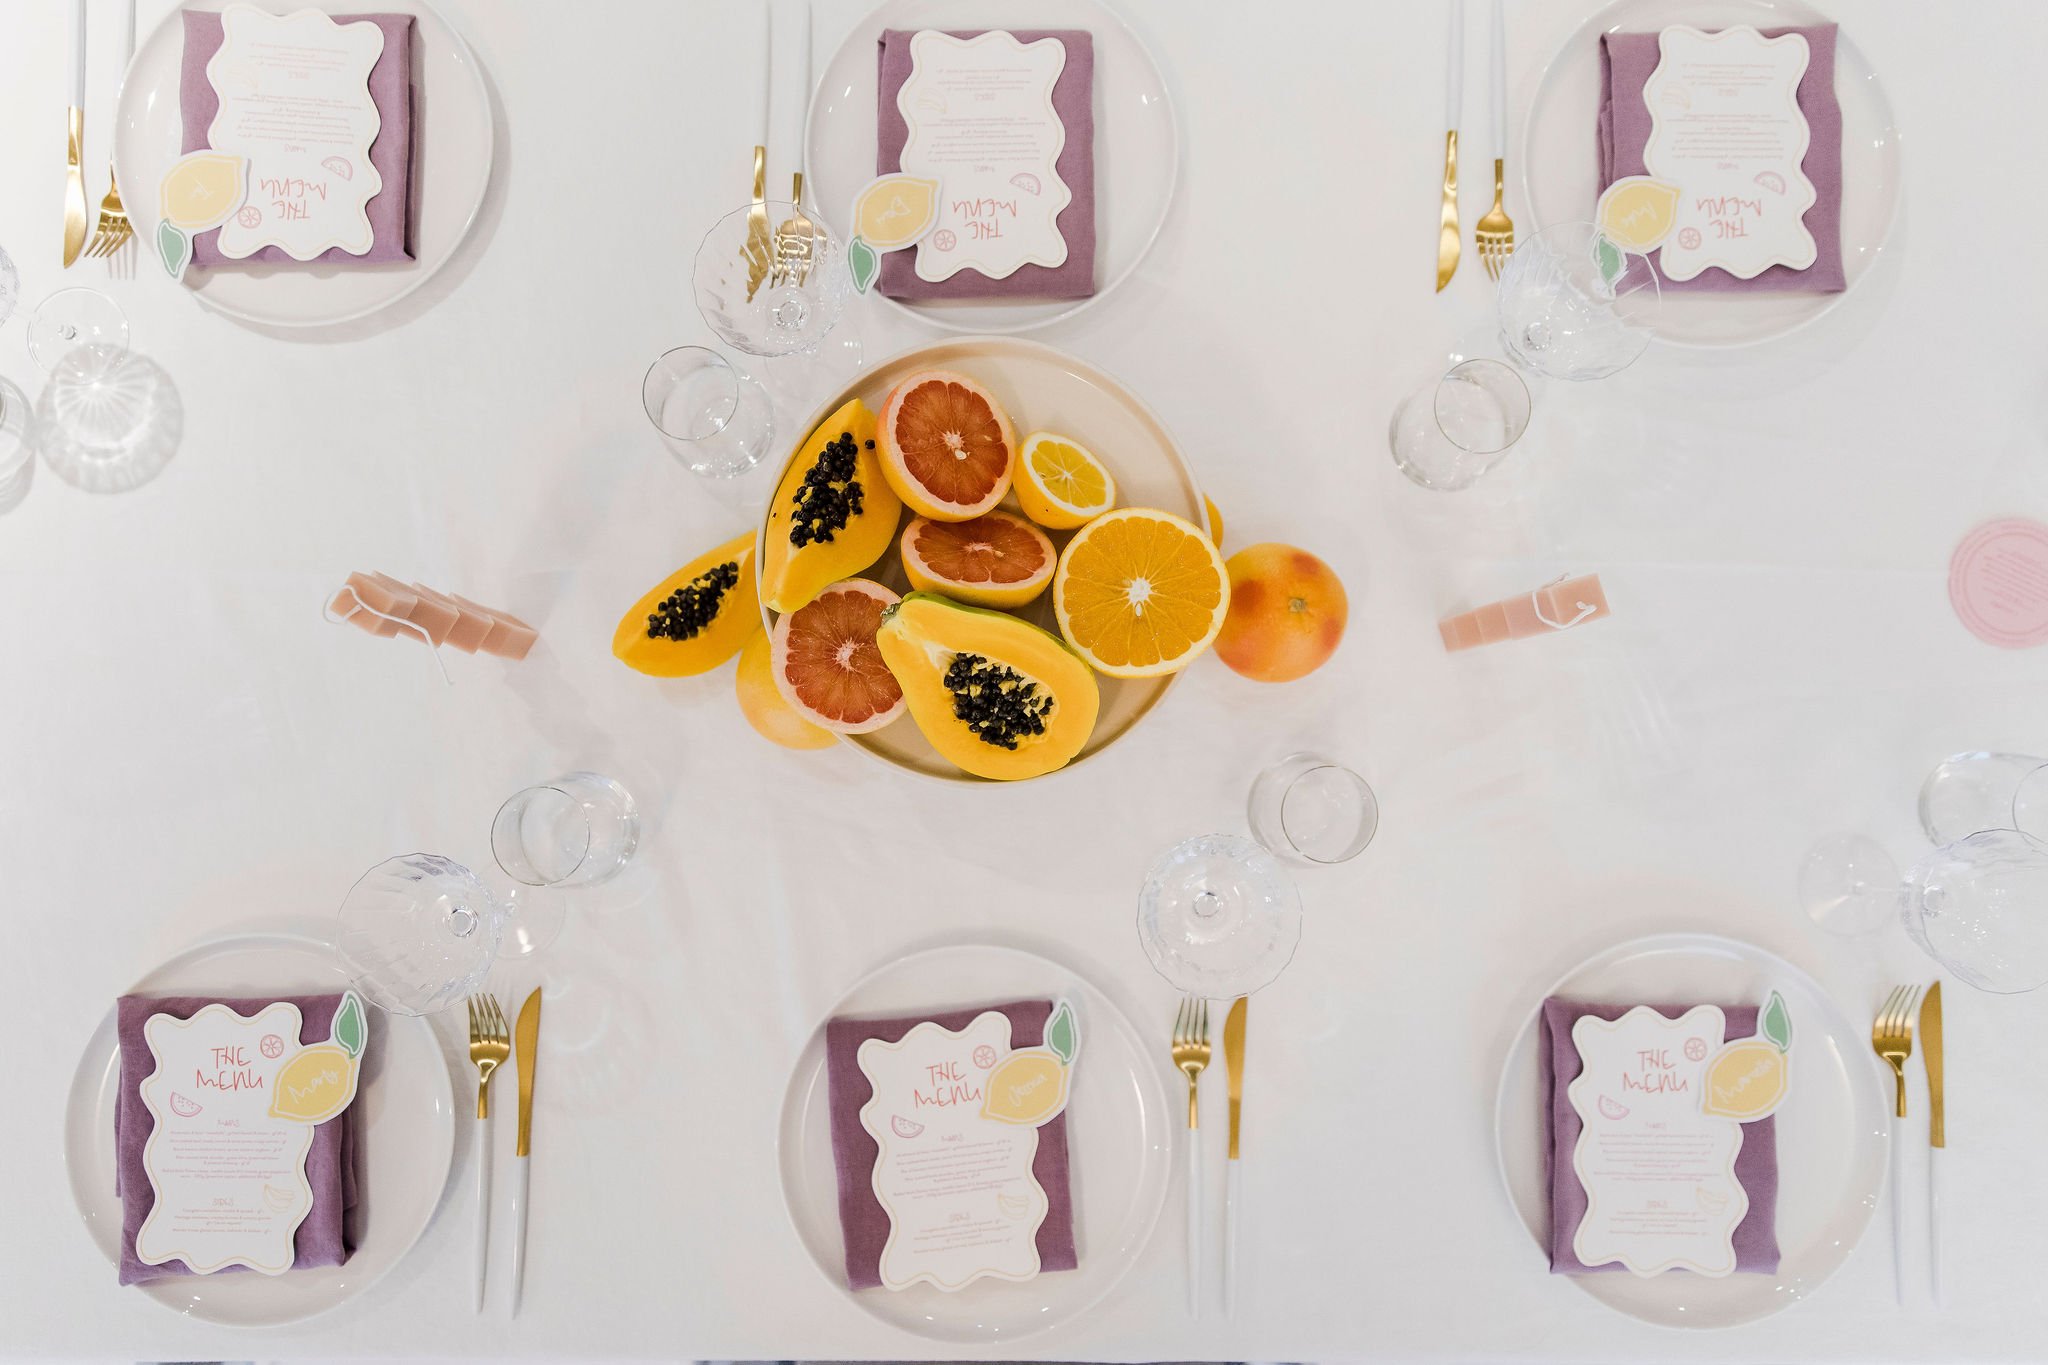 White Tablecloth wit Dirty Lilac Napkins